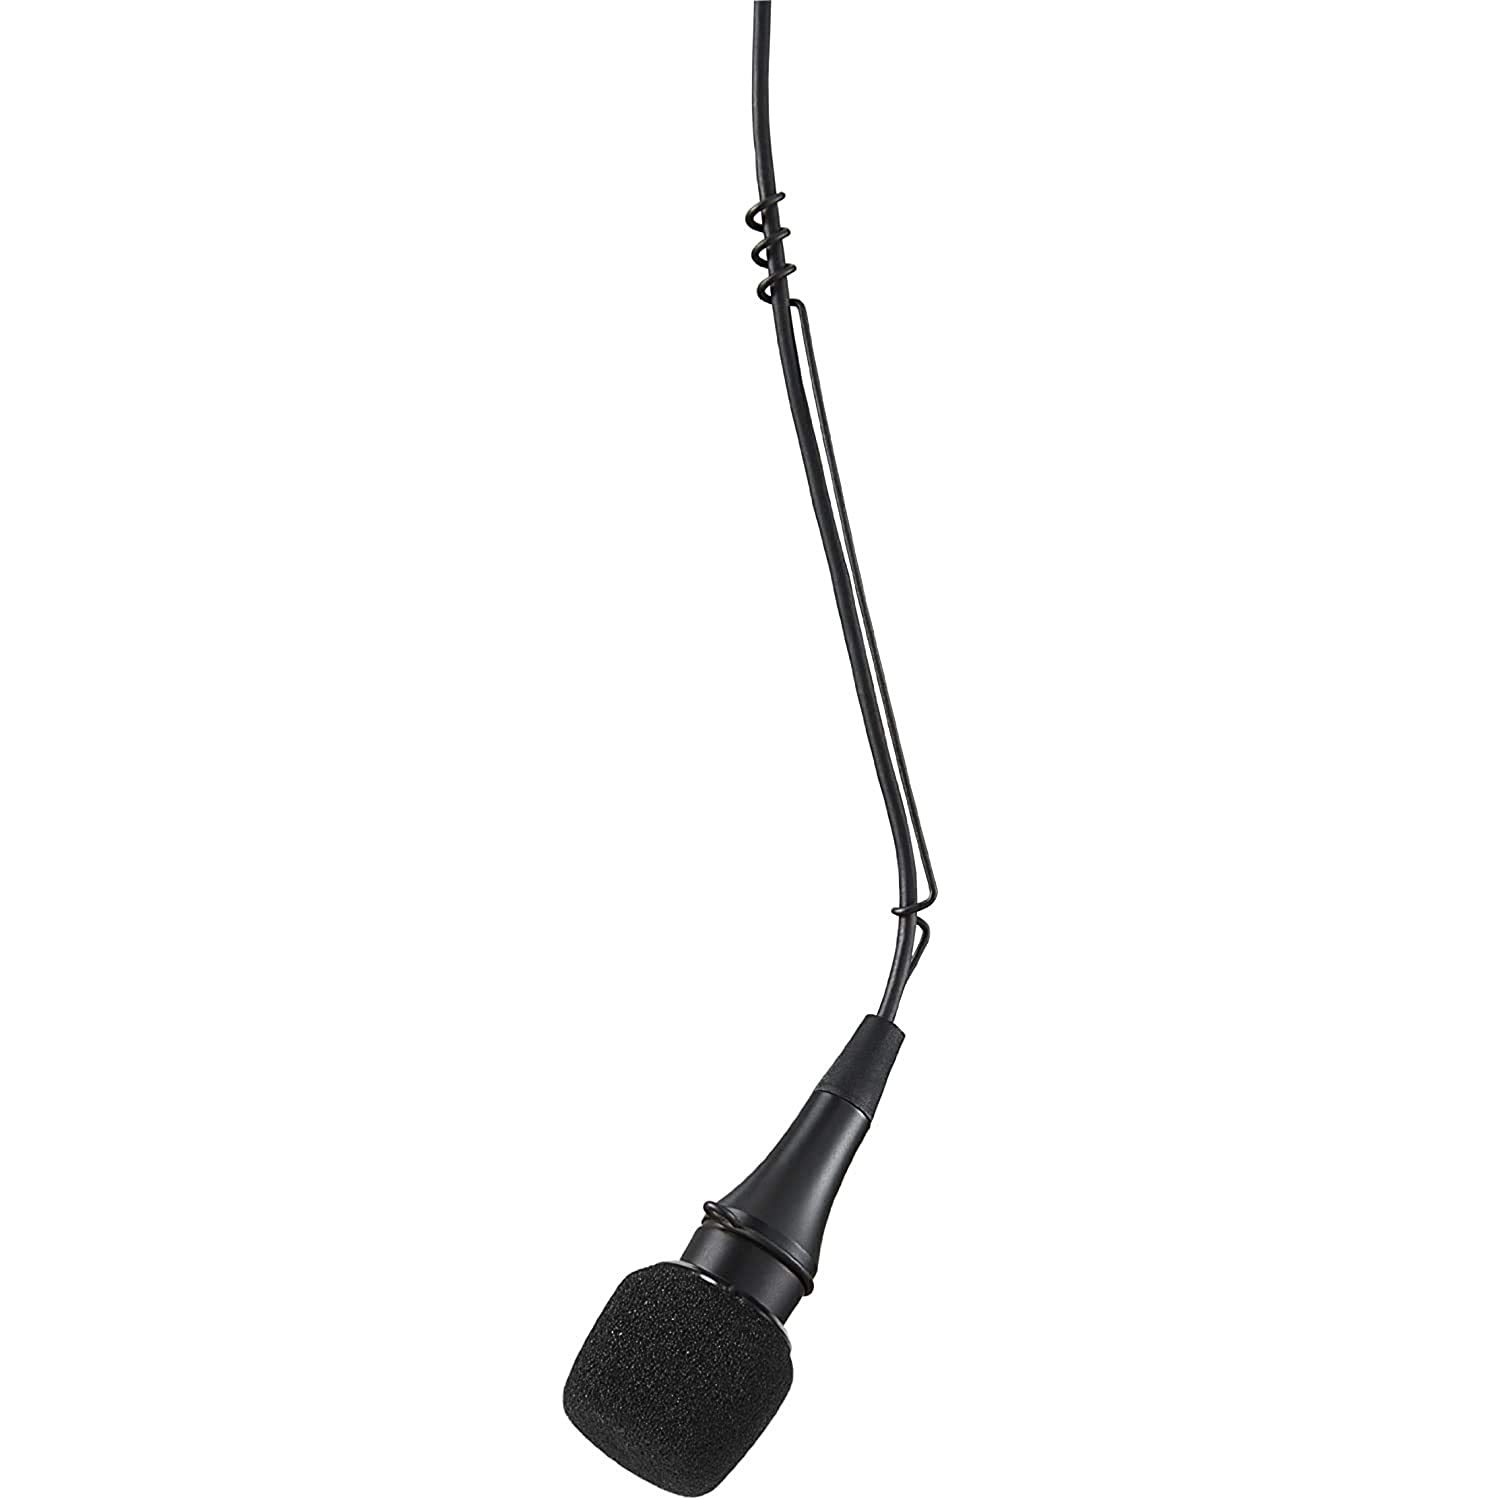 Shure CVO-B/C Overhead Condenser Microphone with 25 Feet Cable, Cardioid - Black